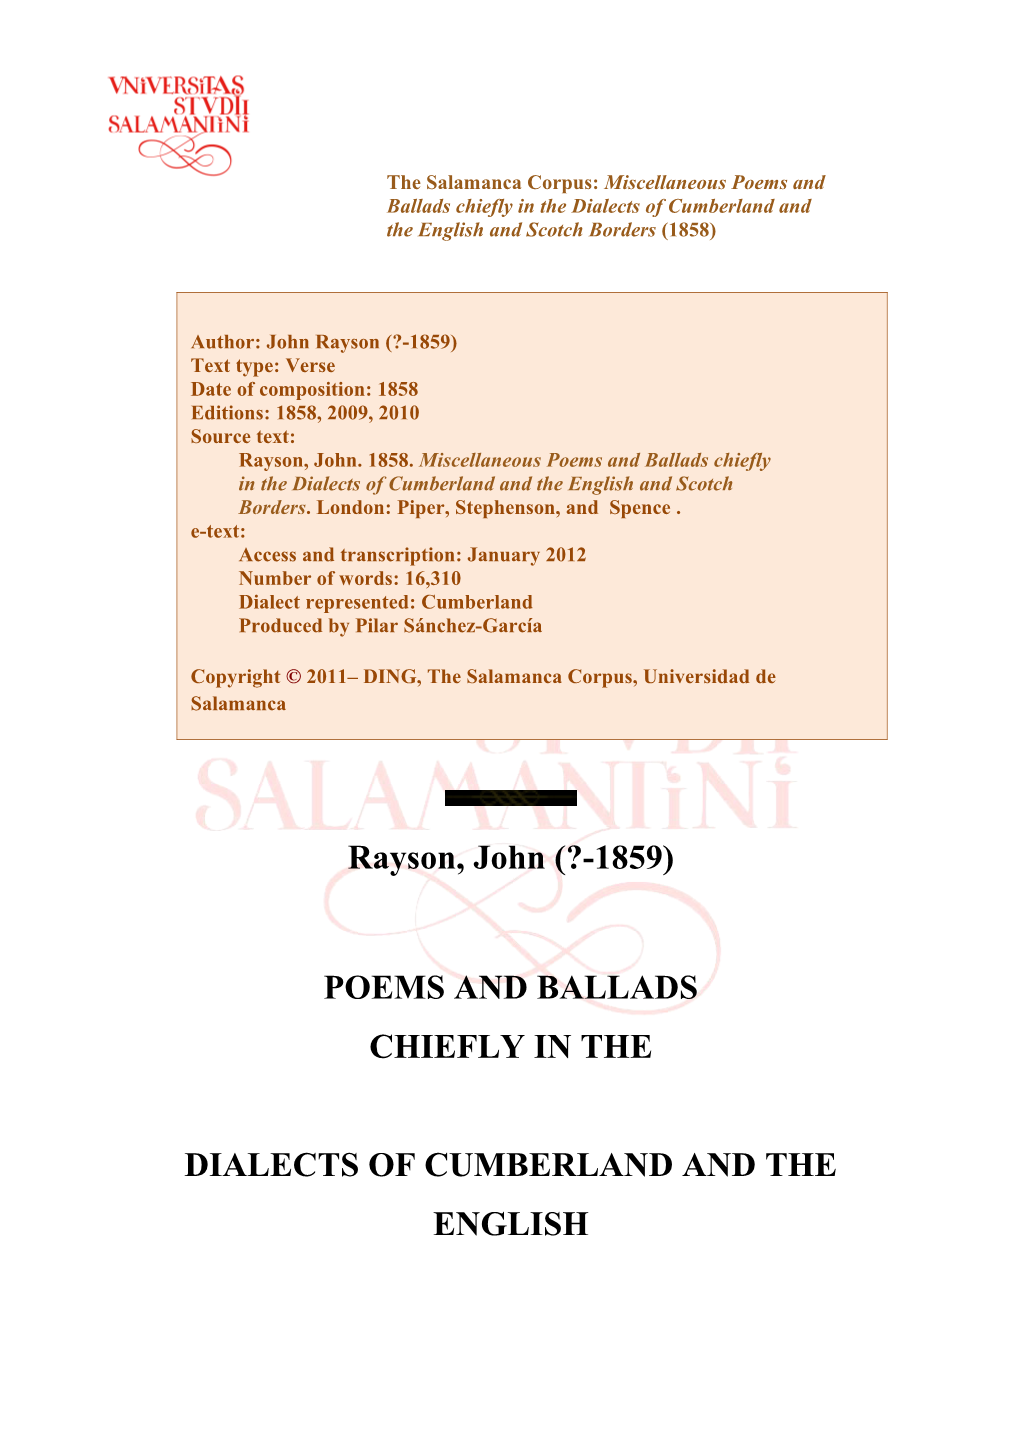 Dialects of Cumberland and the English